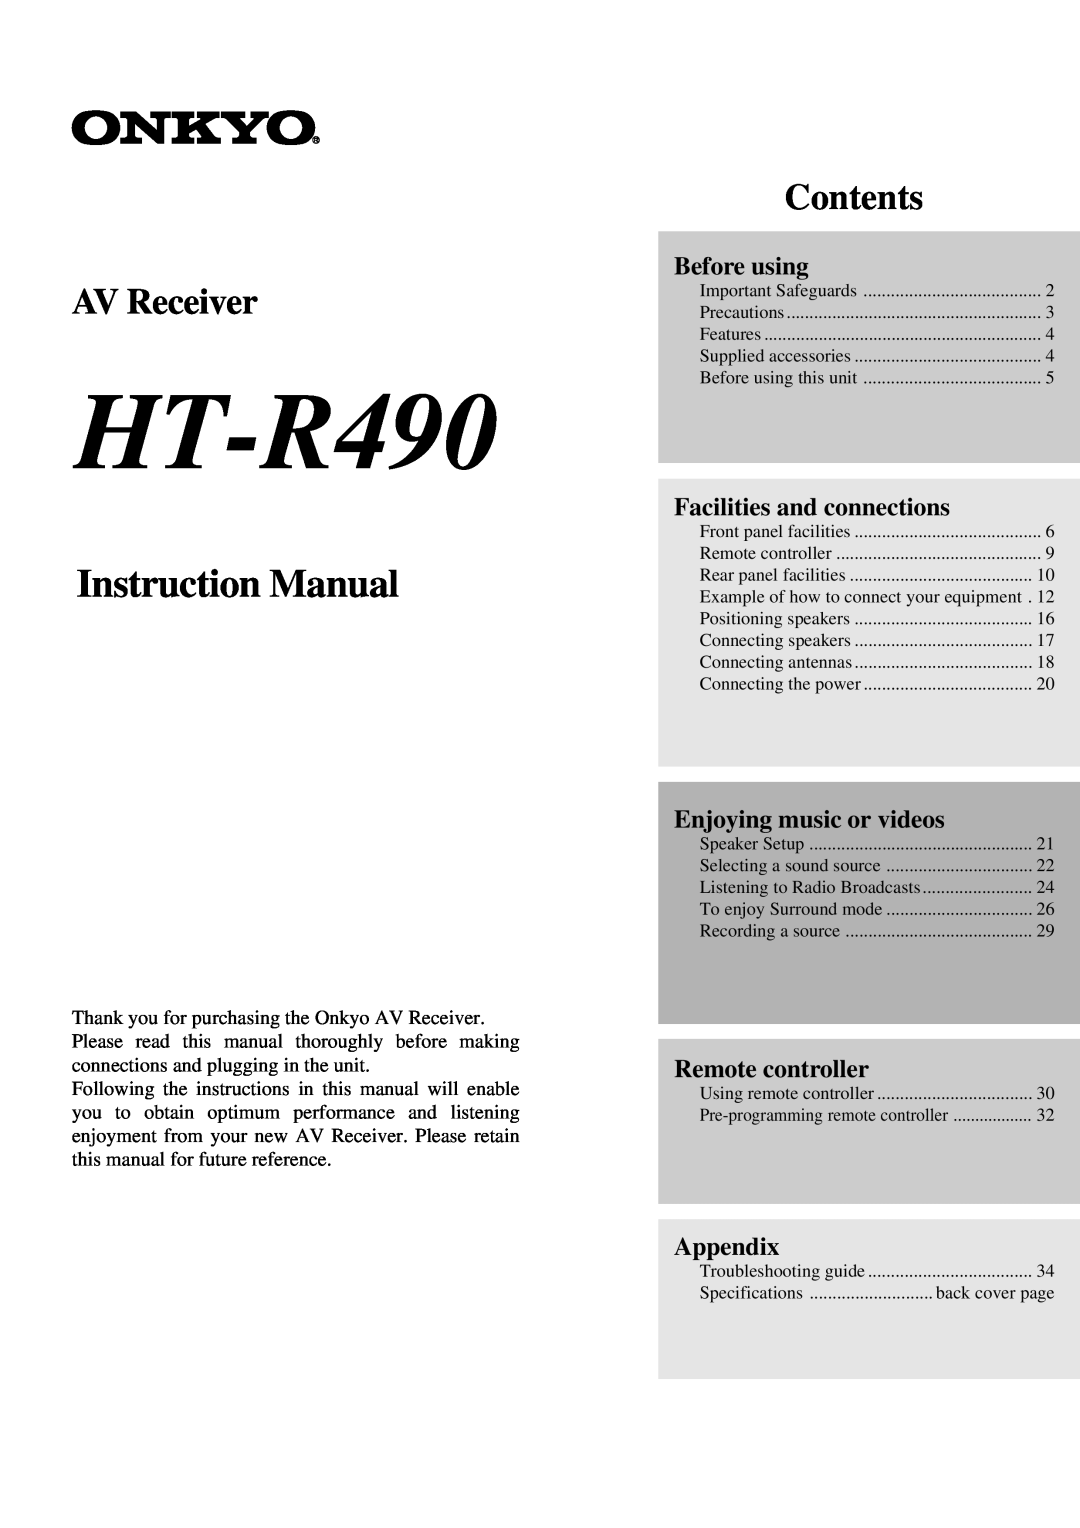 Onkyo HT-R490 appendix Instruction Manual, AV Receiver, Contents, Before using, Facilities and connections, Appendix 